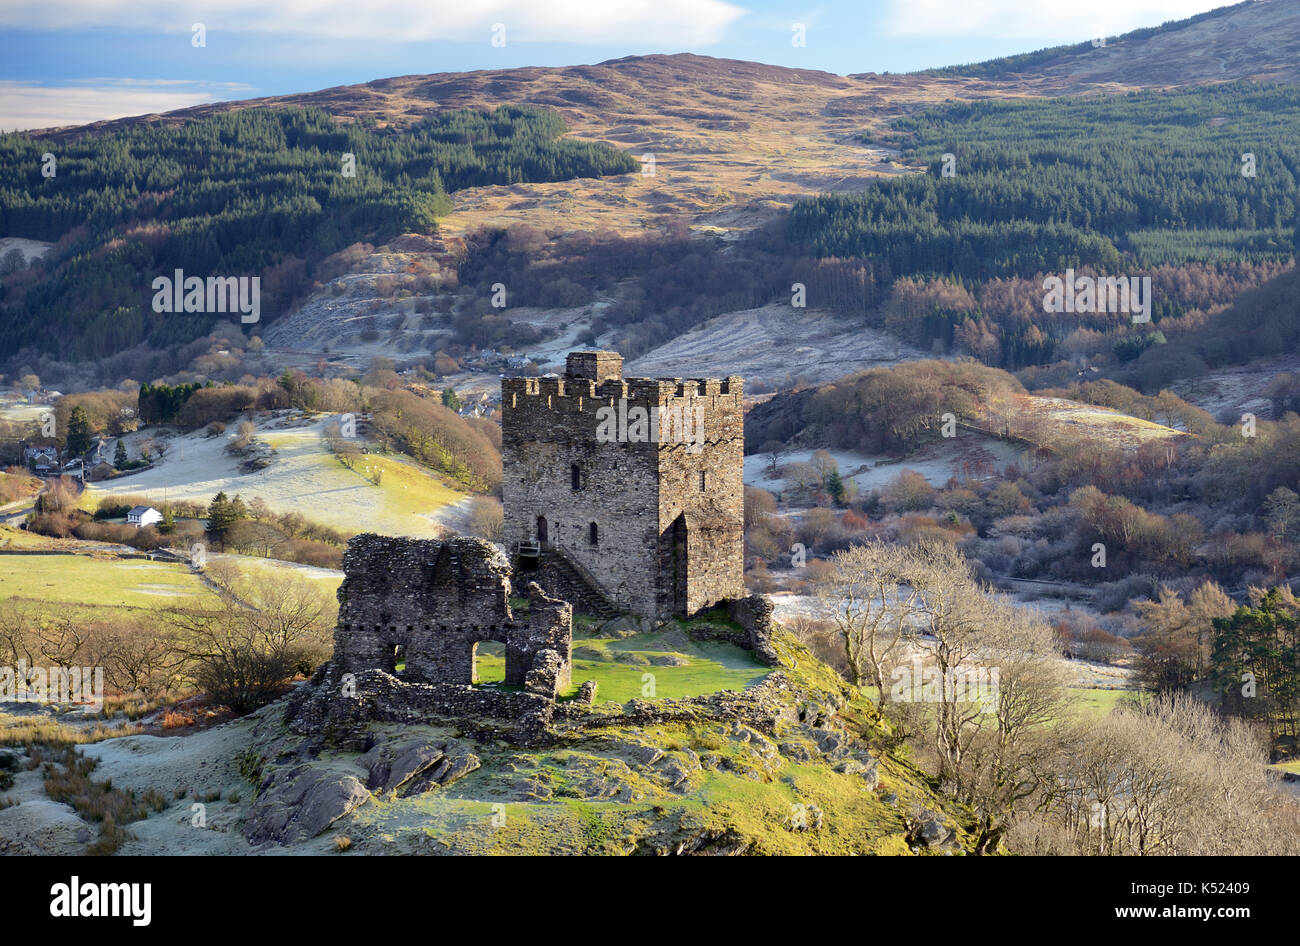 Dolwyddelan Castle is located near Dolwyddelan in North Wales. It was partly built in the early 13th century by Prince Llywelyn but later modified. Stock Photo